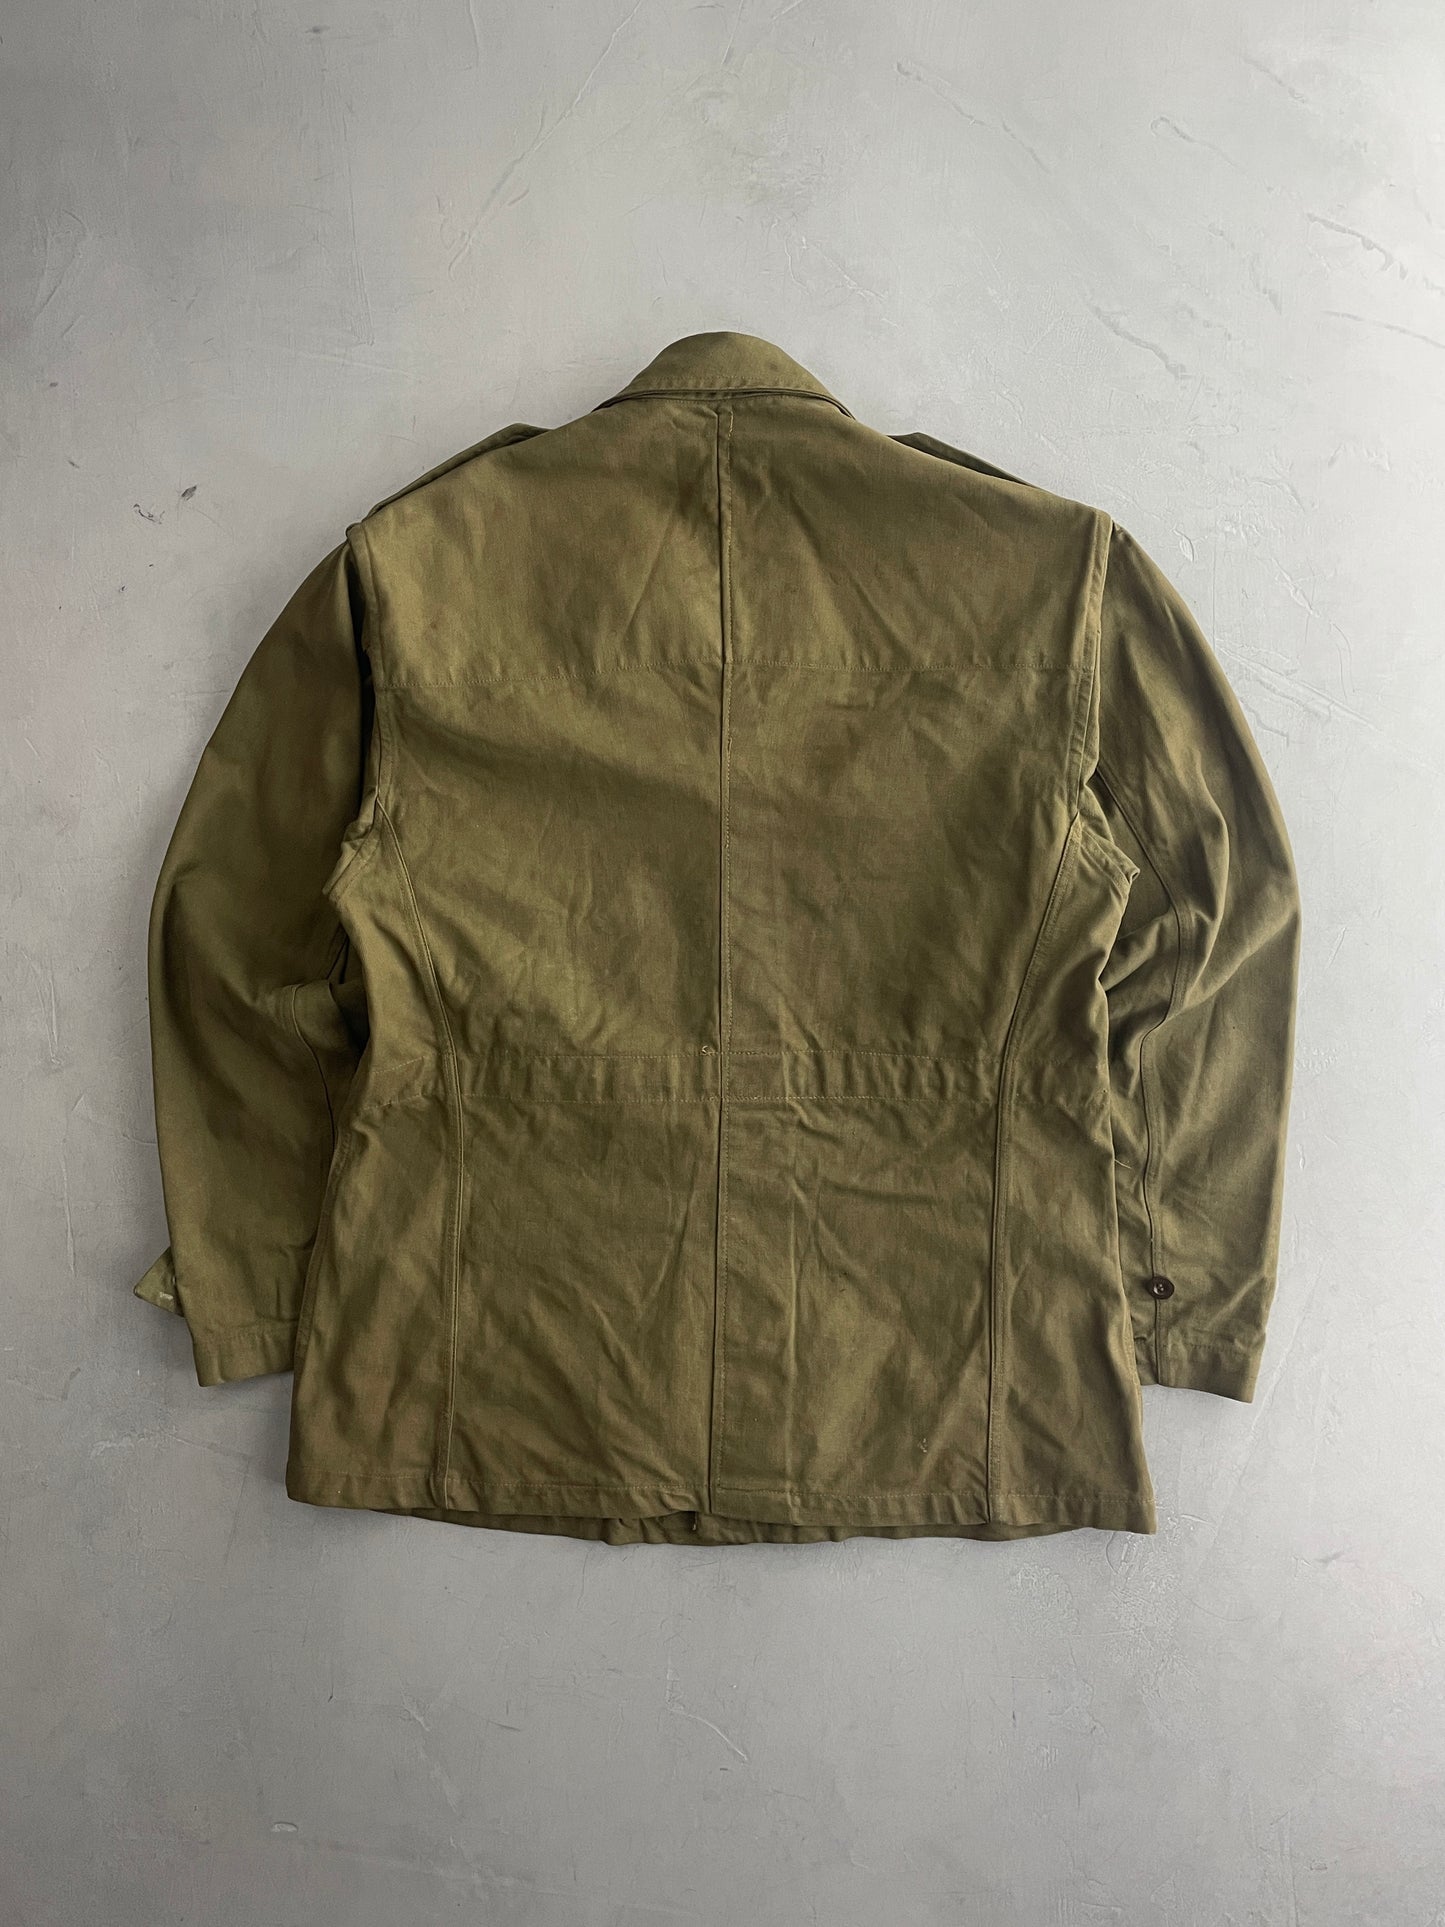 50's French Army Jacket [L]